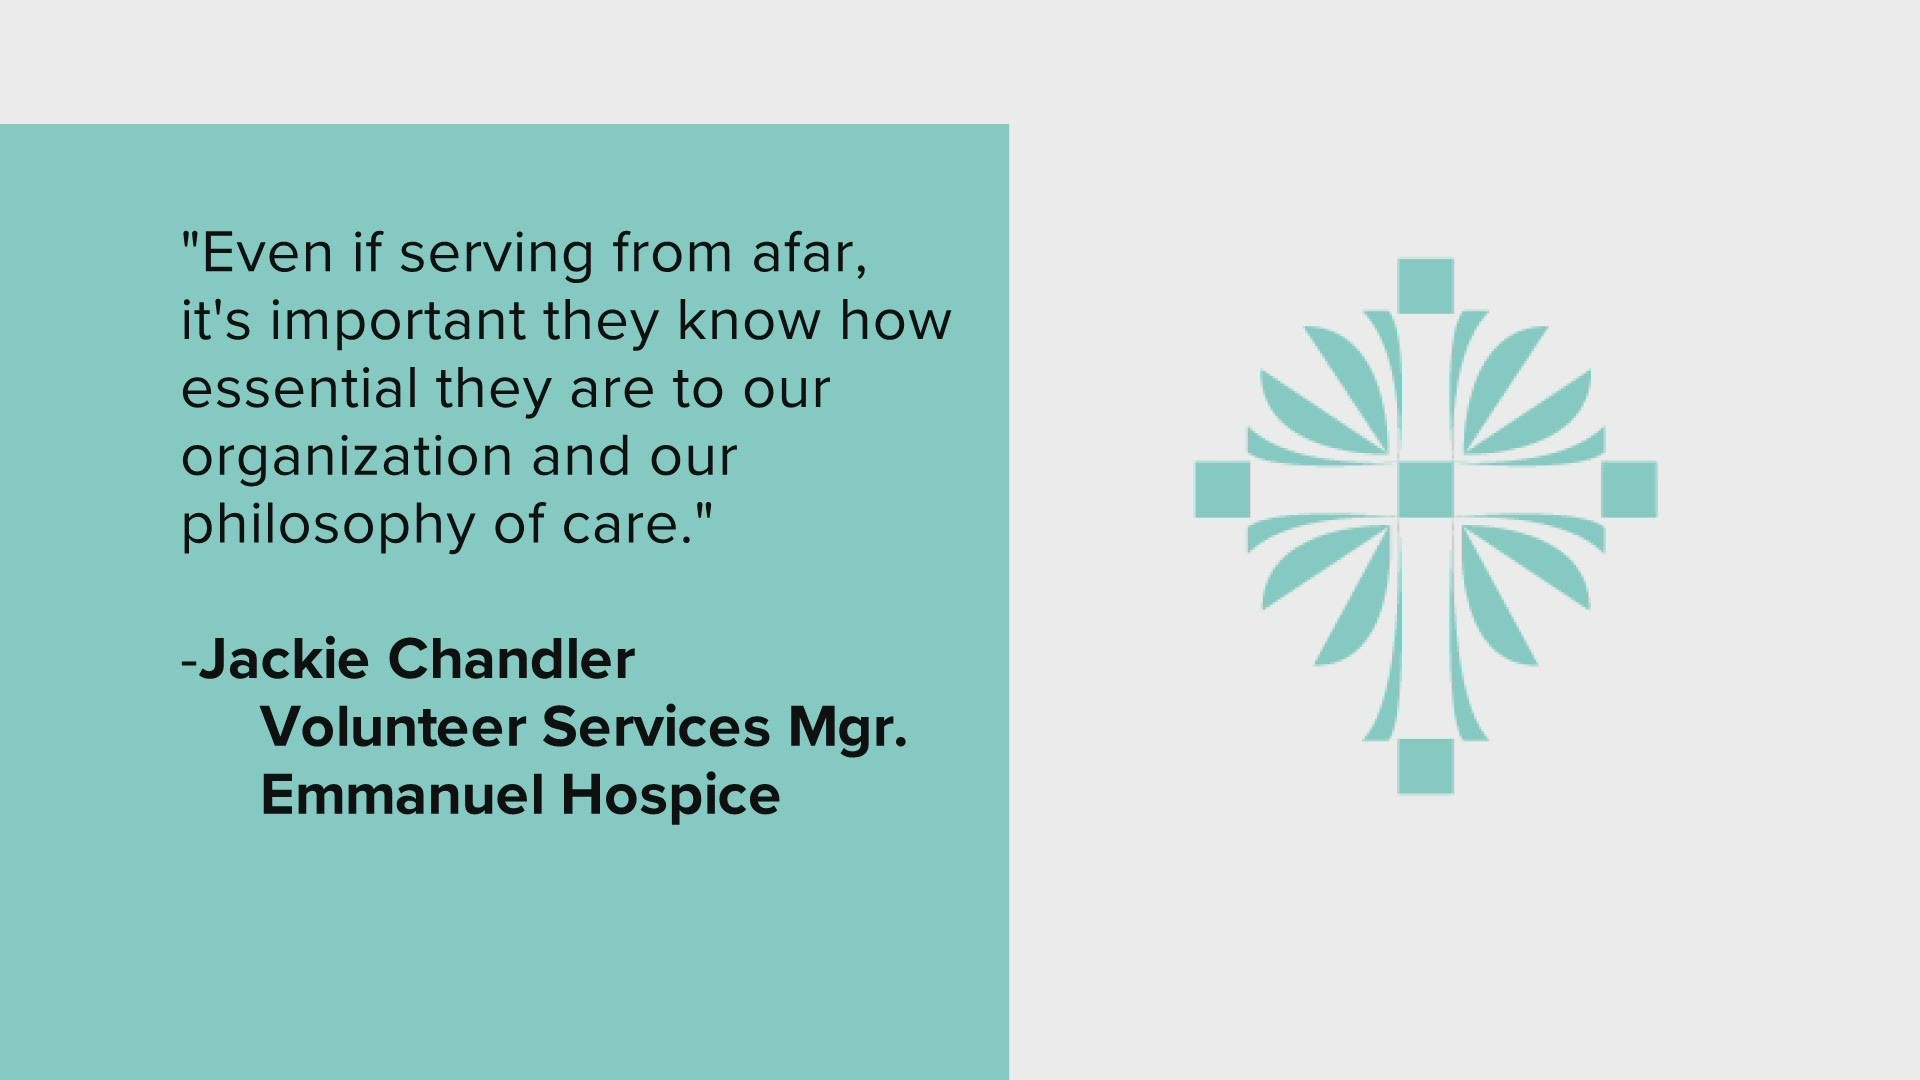 "Even if serving from afar, it's important they know how essential they are to our organization and our philosophy of care."